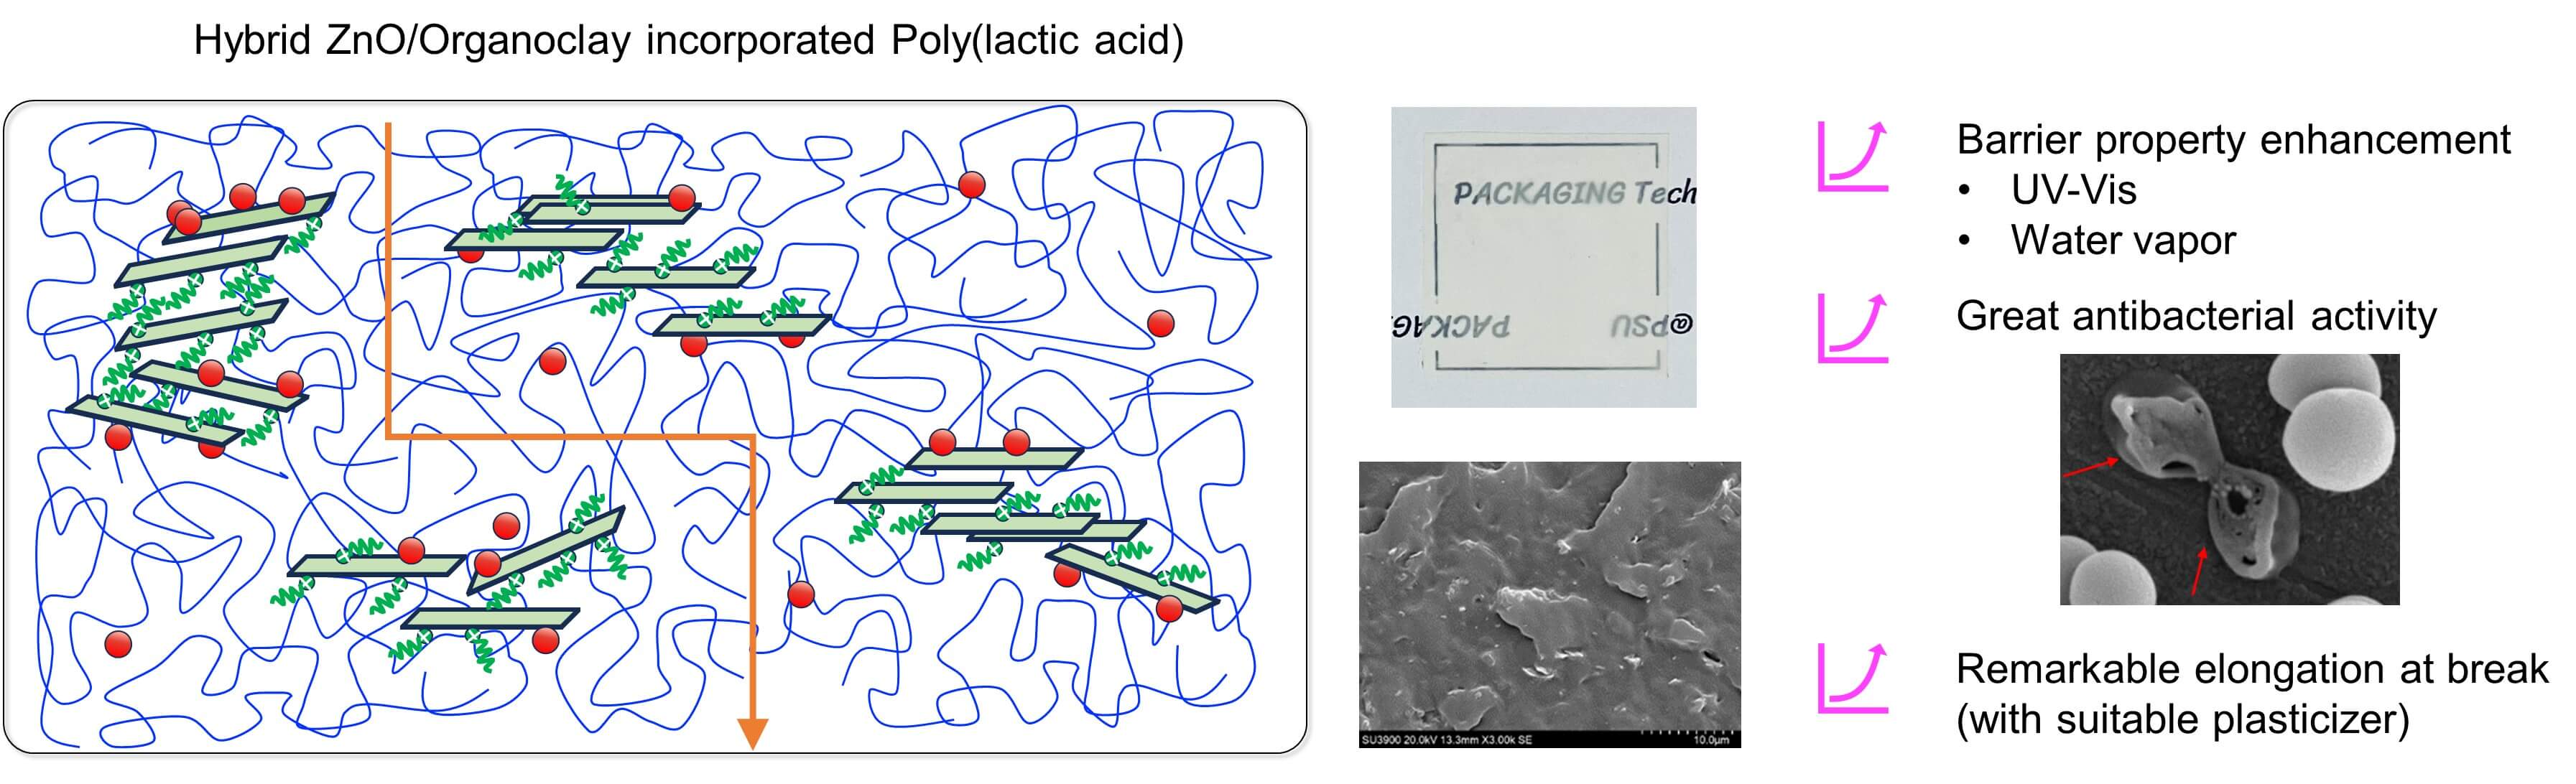 Synergism of Zinc Oxide/Organoclay-Loaded Poly(lactic acid) Hybrid Nanocomposite Plasticized by Triacetin for Sustainable Active Food Packaging